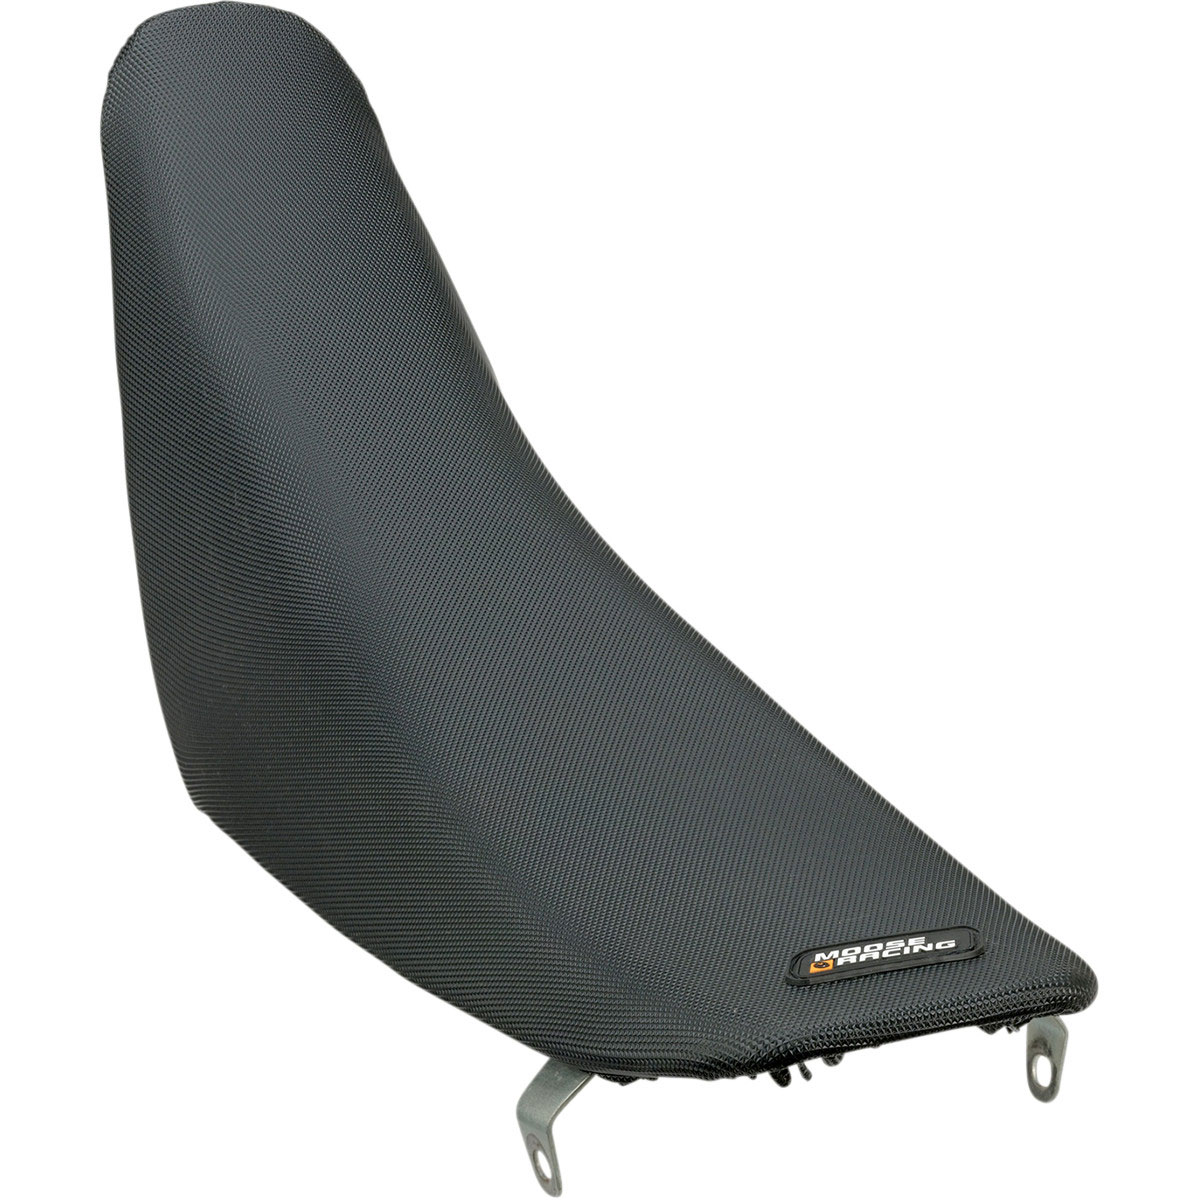 Factory Effex All Grip Seat Cover Standard 09-24310 